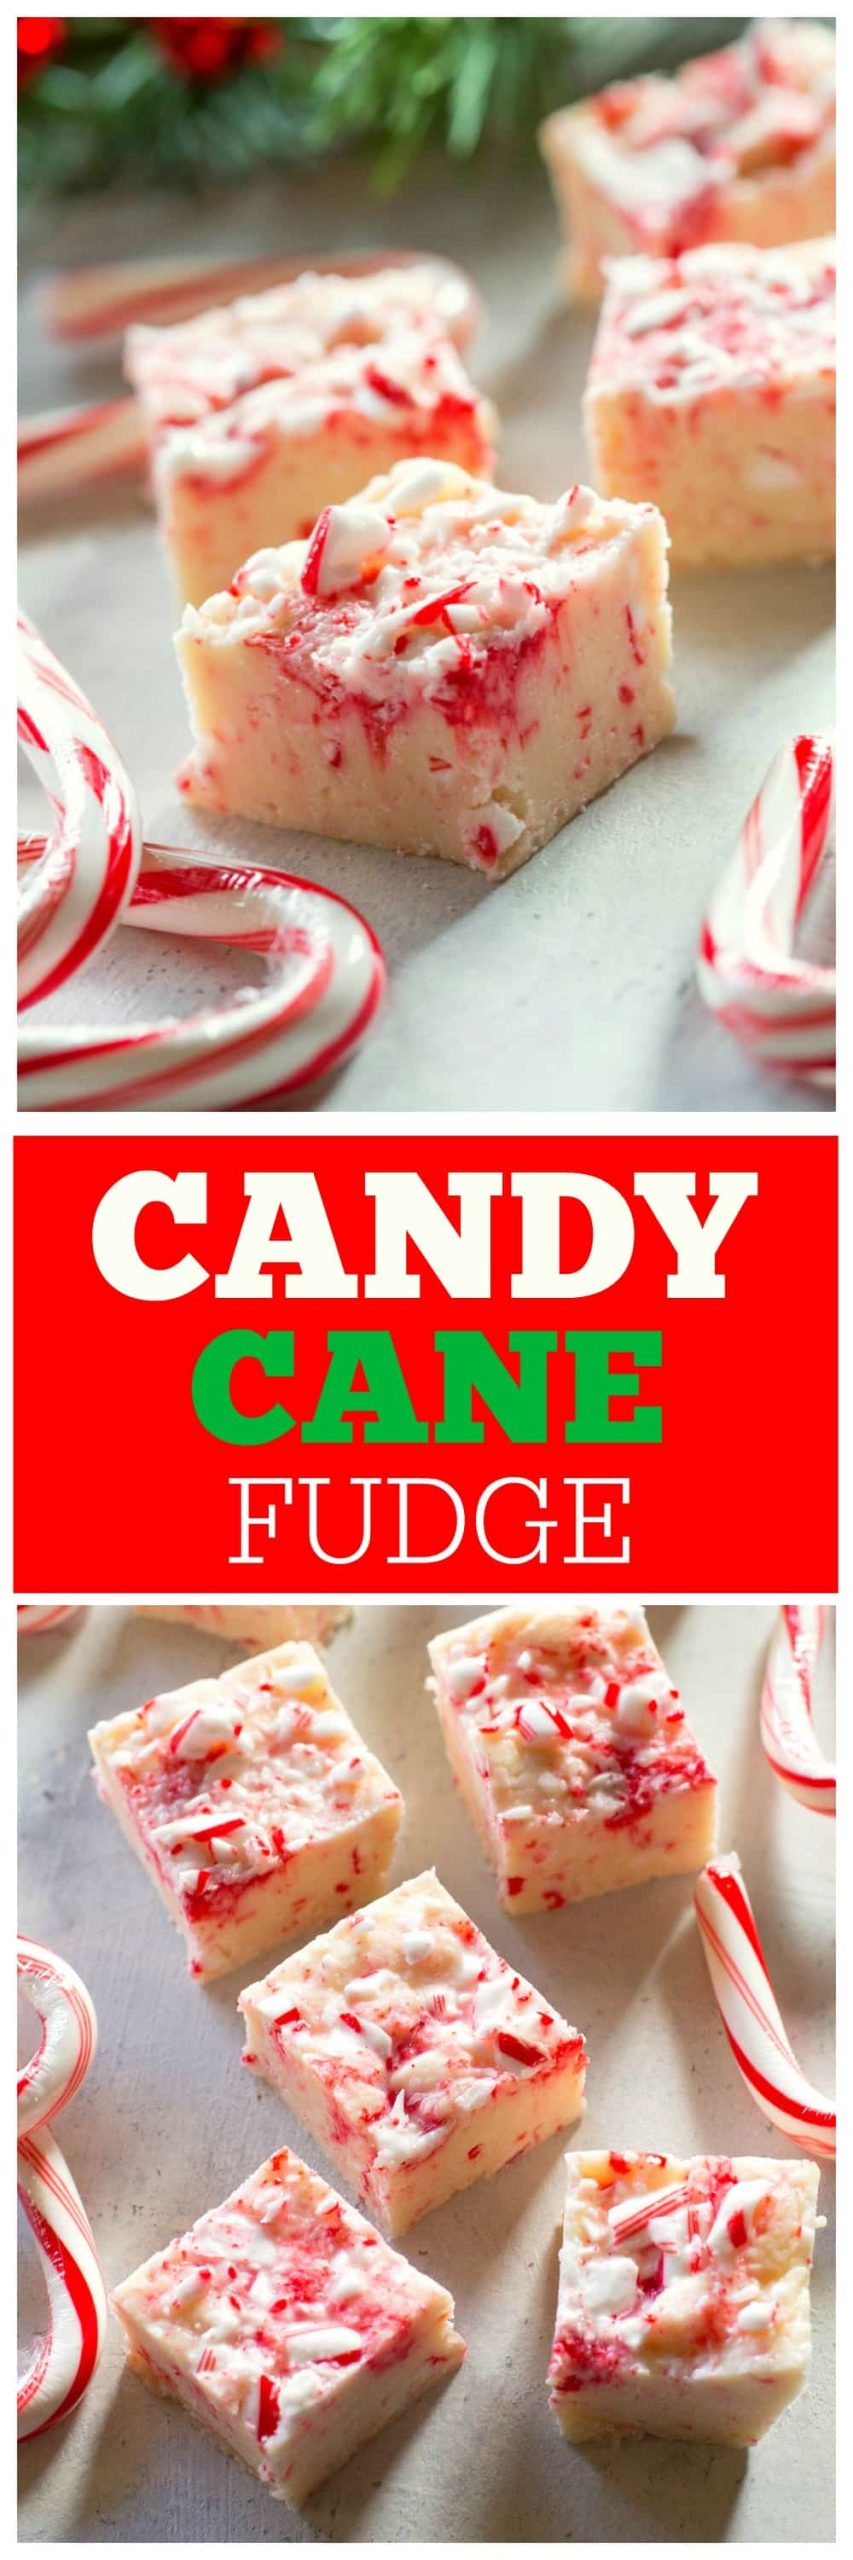 Candy Cane Fudge - only 5 ingredients and so delicious. #candy #cane #fudge #christmas #dessert